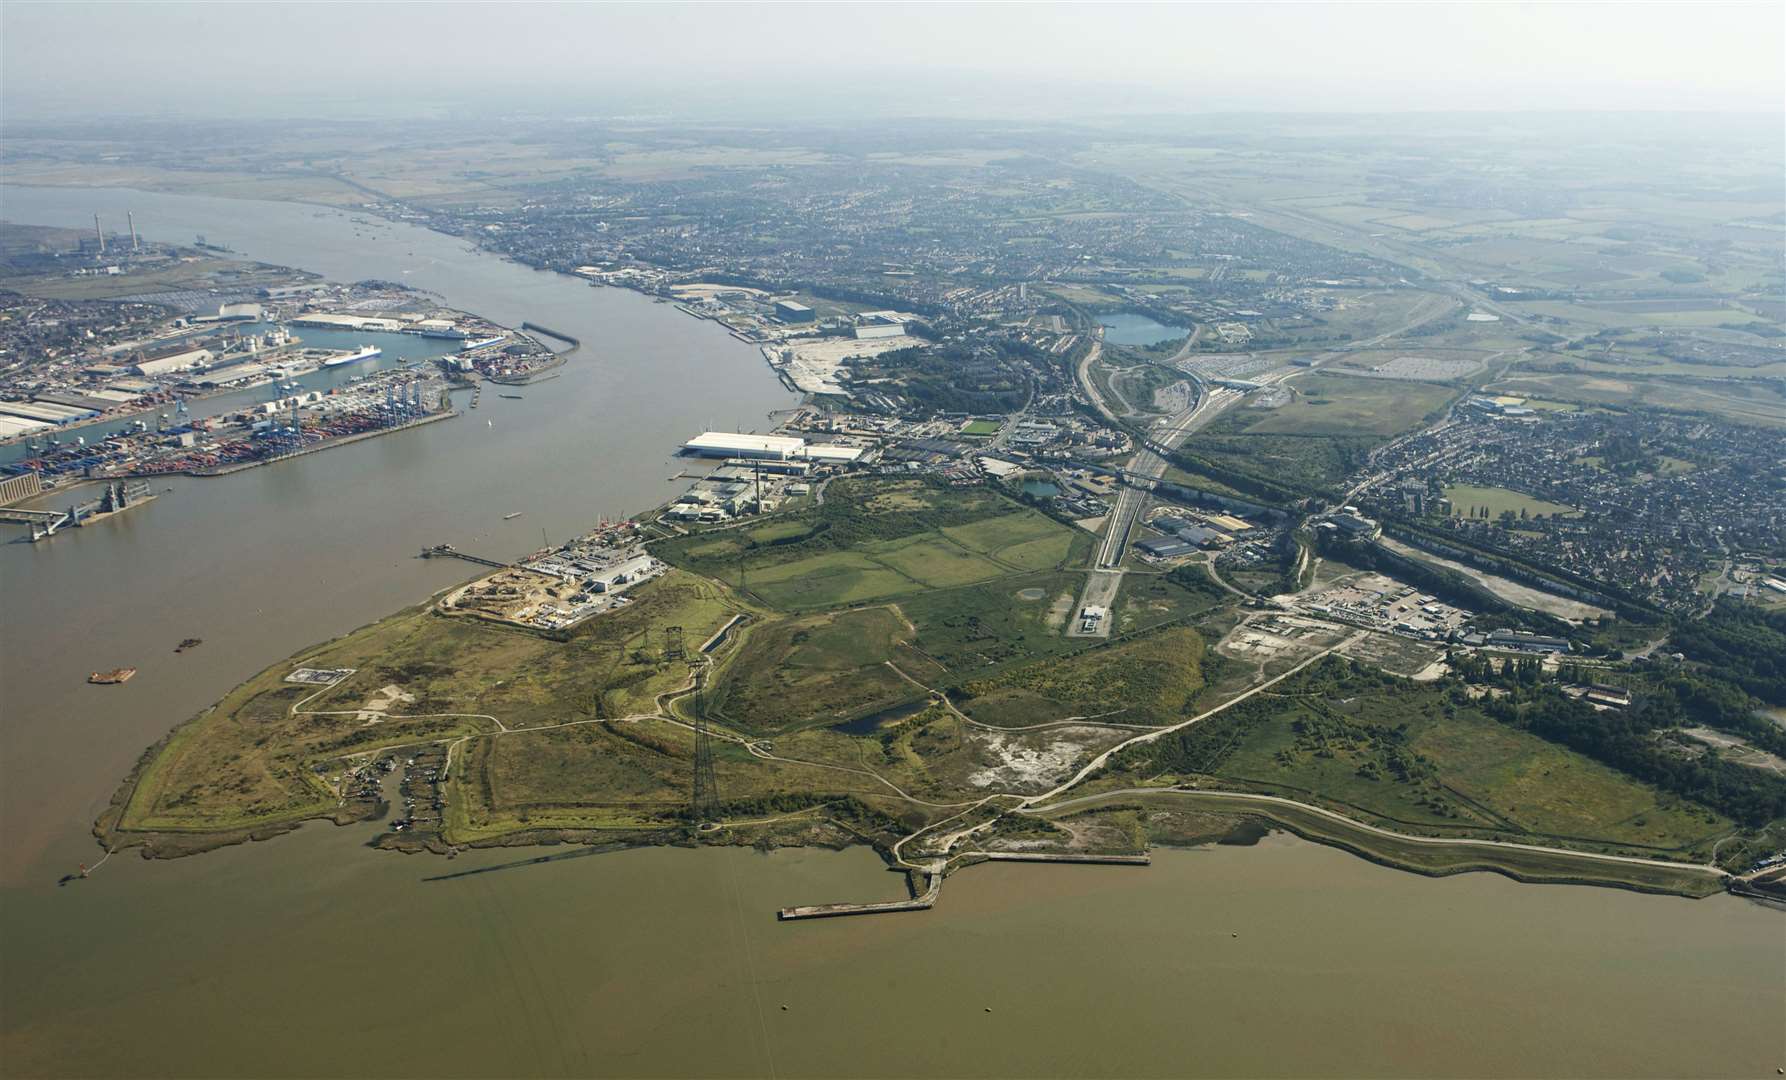 The London Resort has been earmarked to be built on the Swanscombe Peninsula. Picture: EDF Energy